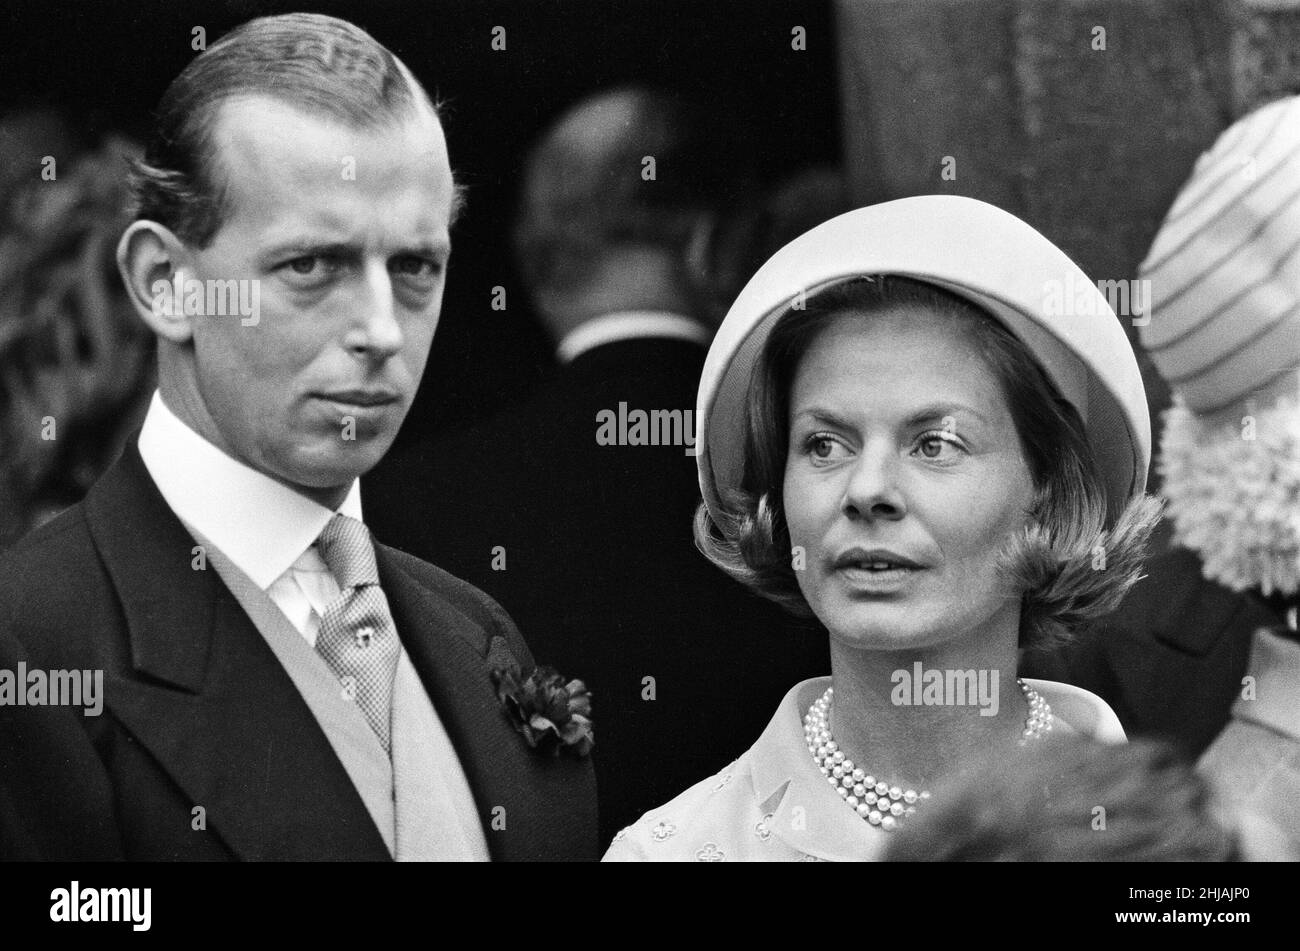 The wedding of Princess Alexandra of Kent and Angus Ogilvy at Westminster Abbey. Pictured are guests the Duke and Duchess of Kent. 24th April 1963. Stock Photo